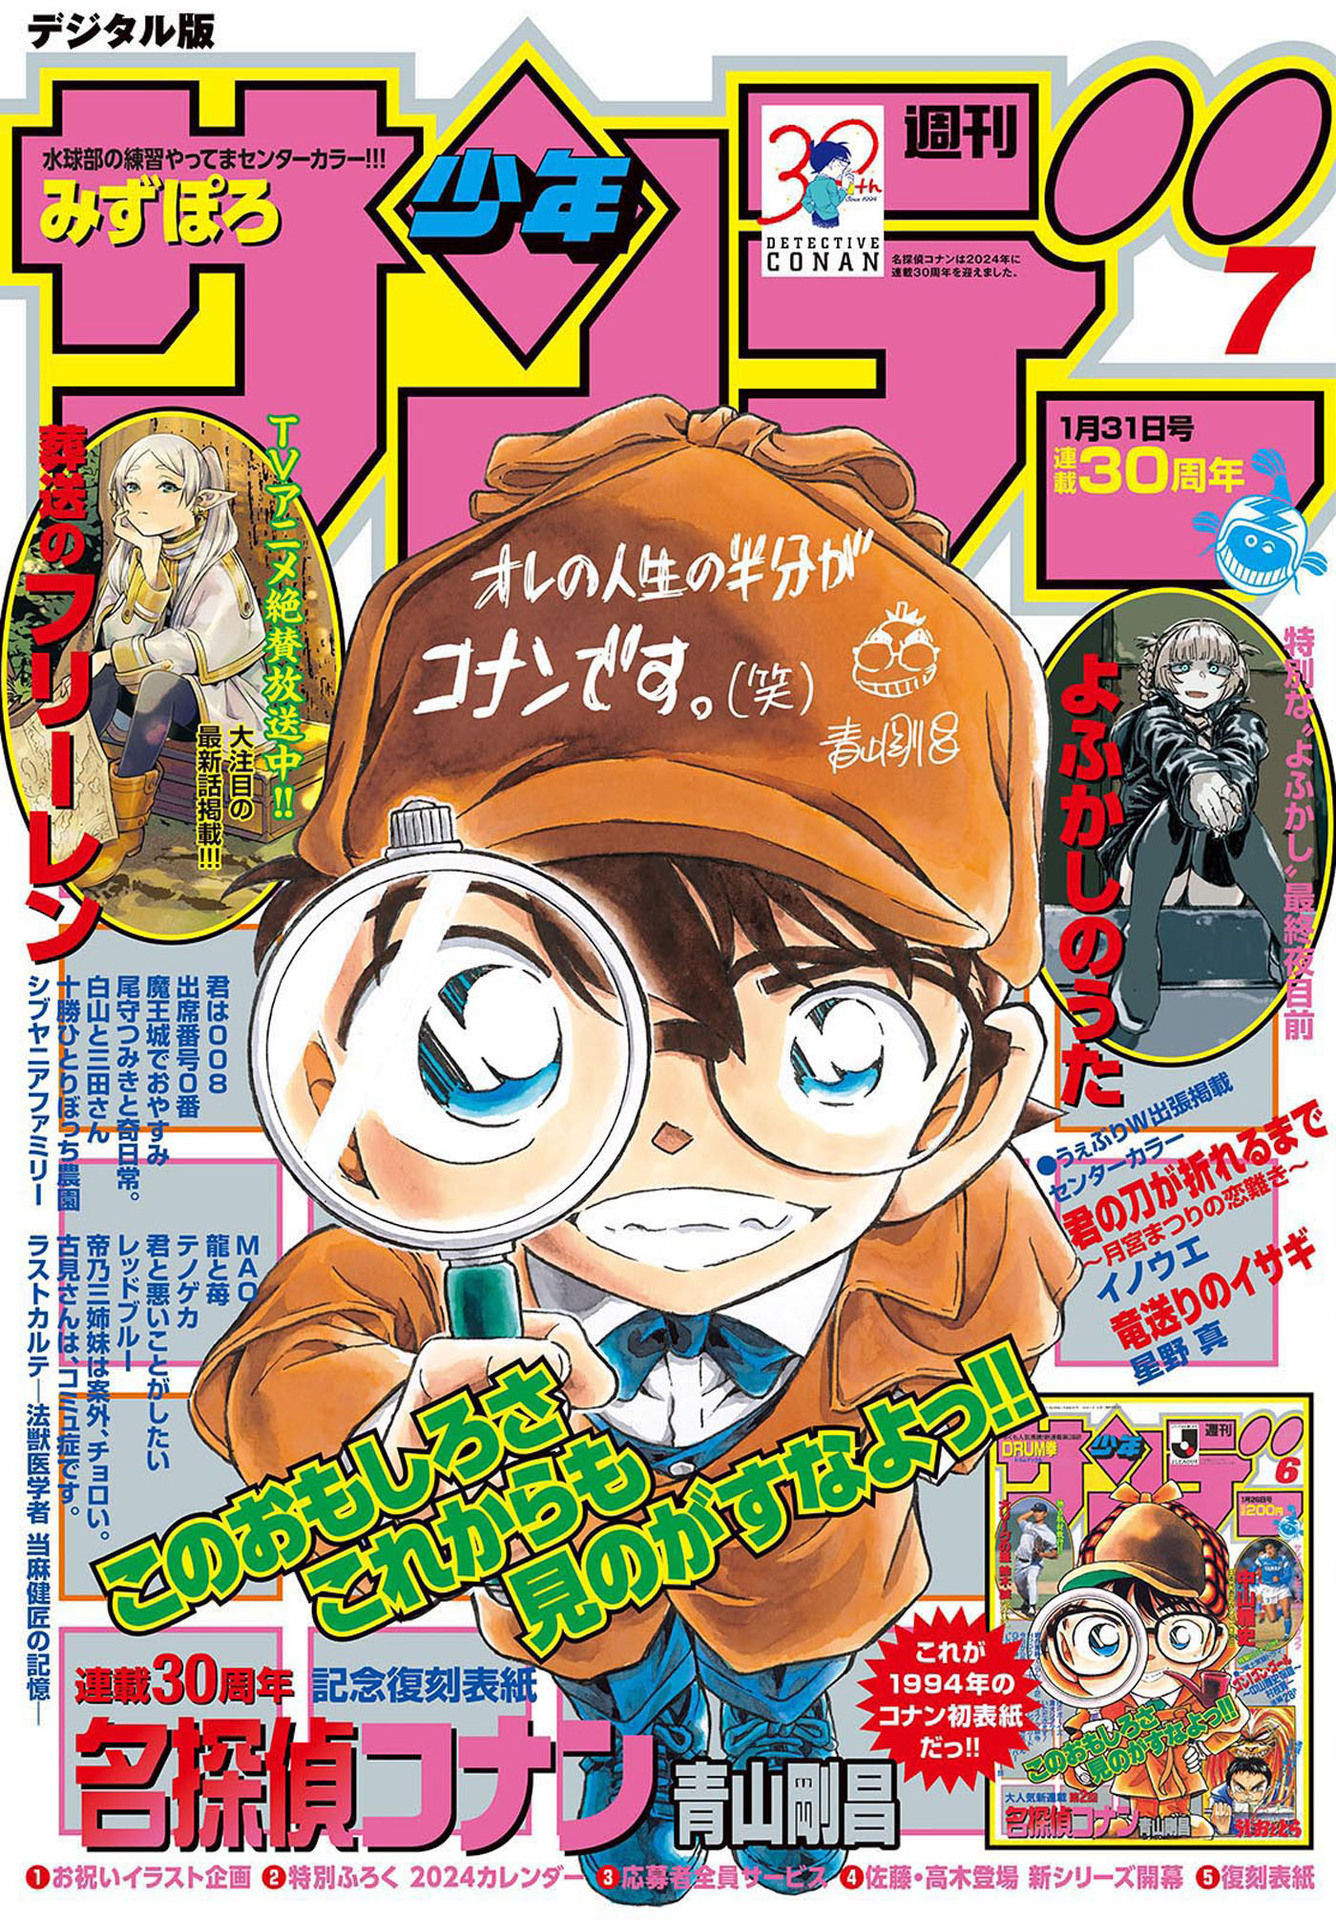 Detective Conan - Chapter 1123 - Page 1